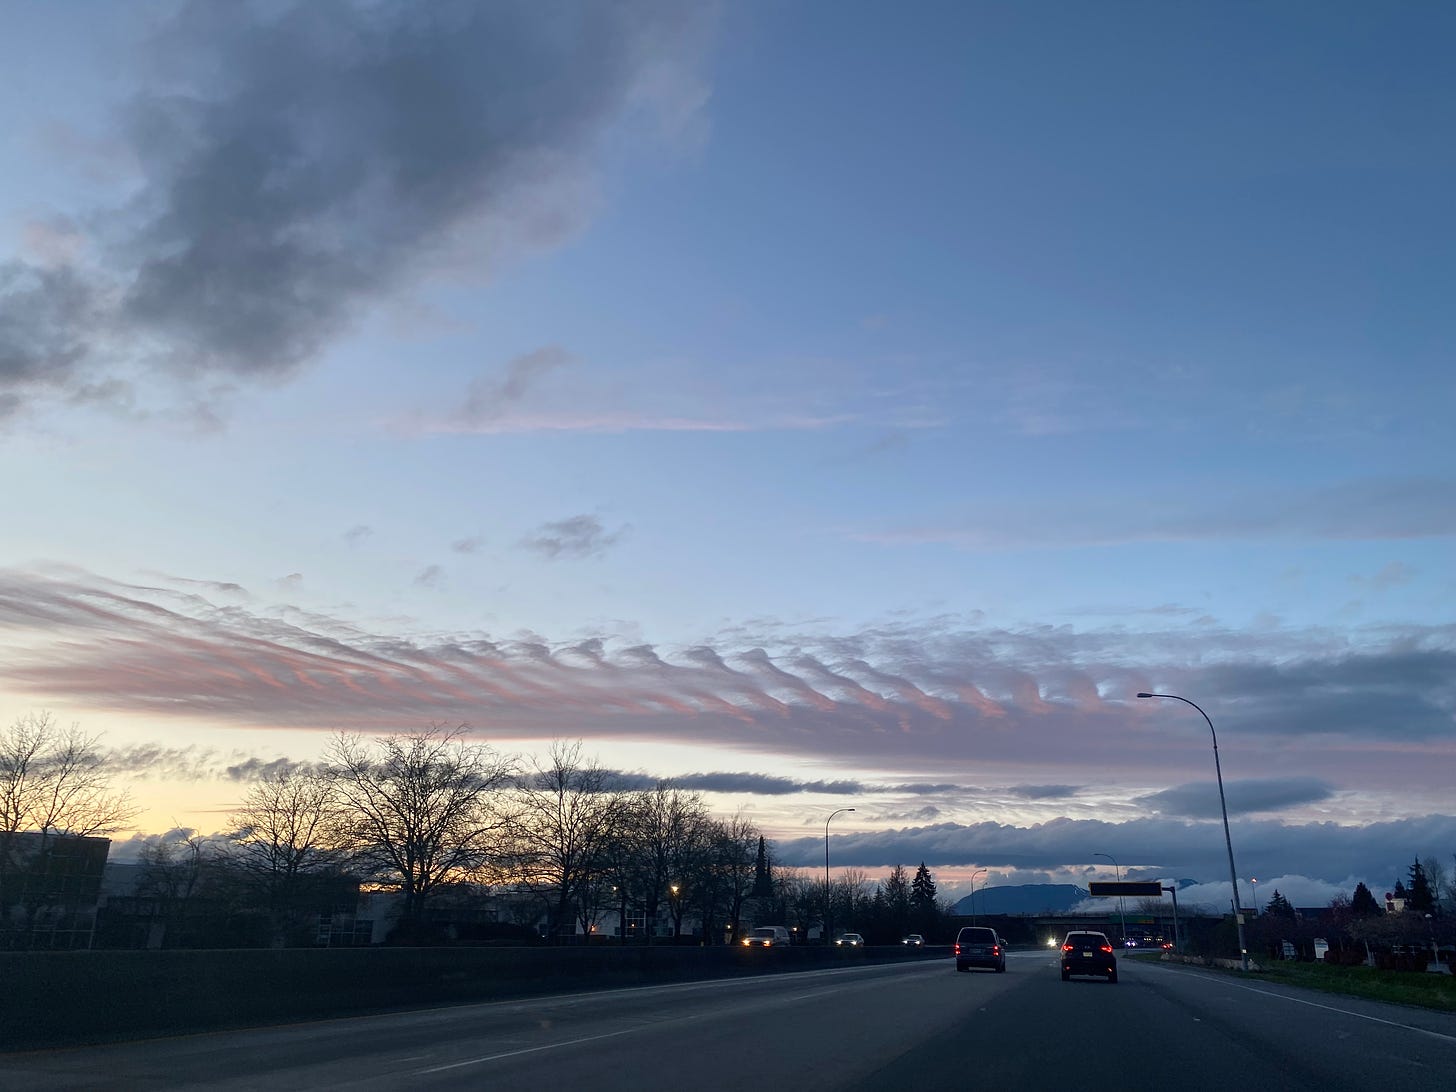 A view of the sky from the highway after Sunday's storm. It's near sunset, and the sky is a deep blue, with rippling clouds tinged pink and orange near the horizon. Cars on the highway have their lights on, and the mountains are just visible in the distance.